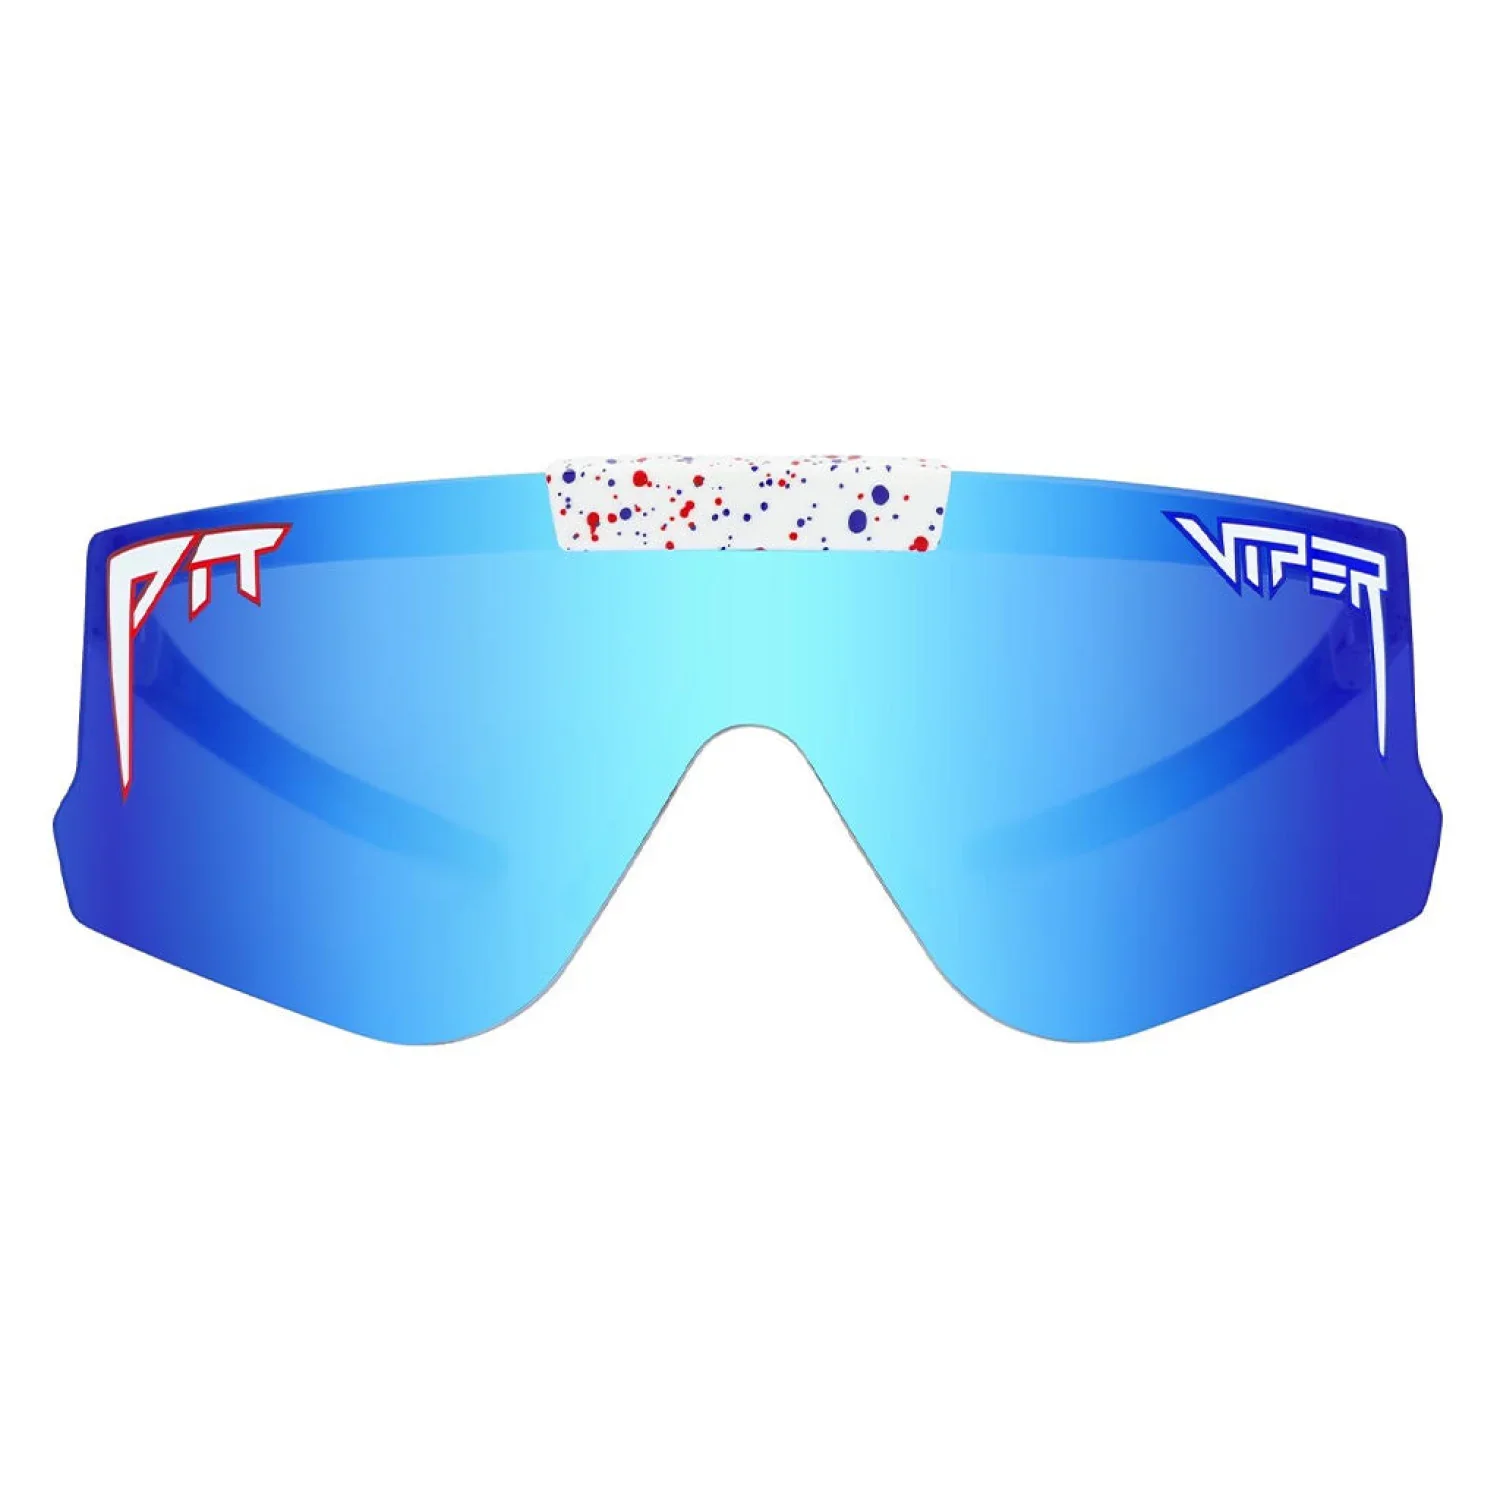 Pit Viper 07. EYEWEAR - SUNGLASSES - SUNGLASSES The Flip-Offs THE ABSOLUTE FREEDOM